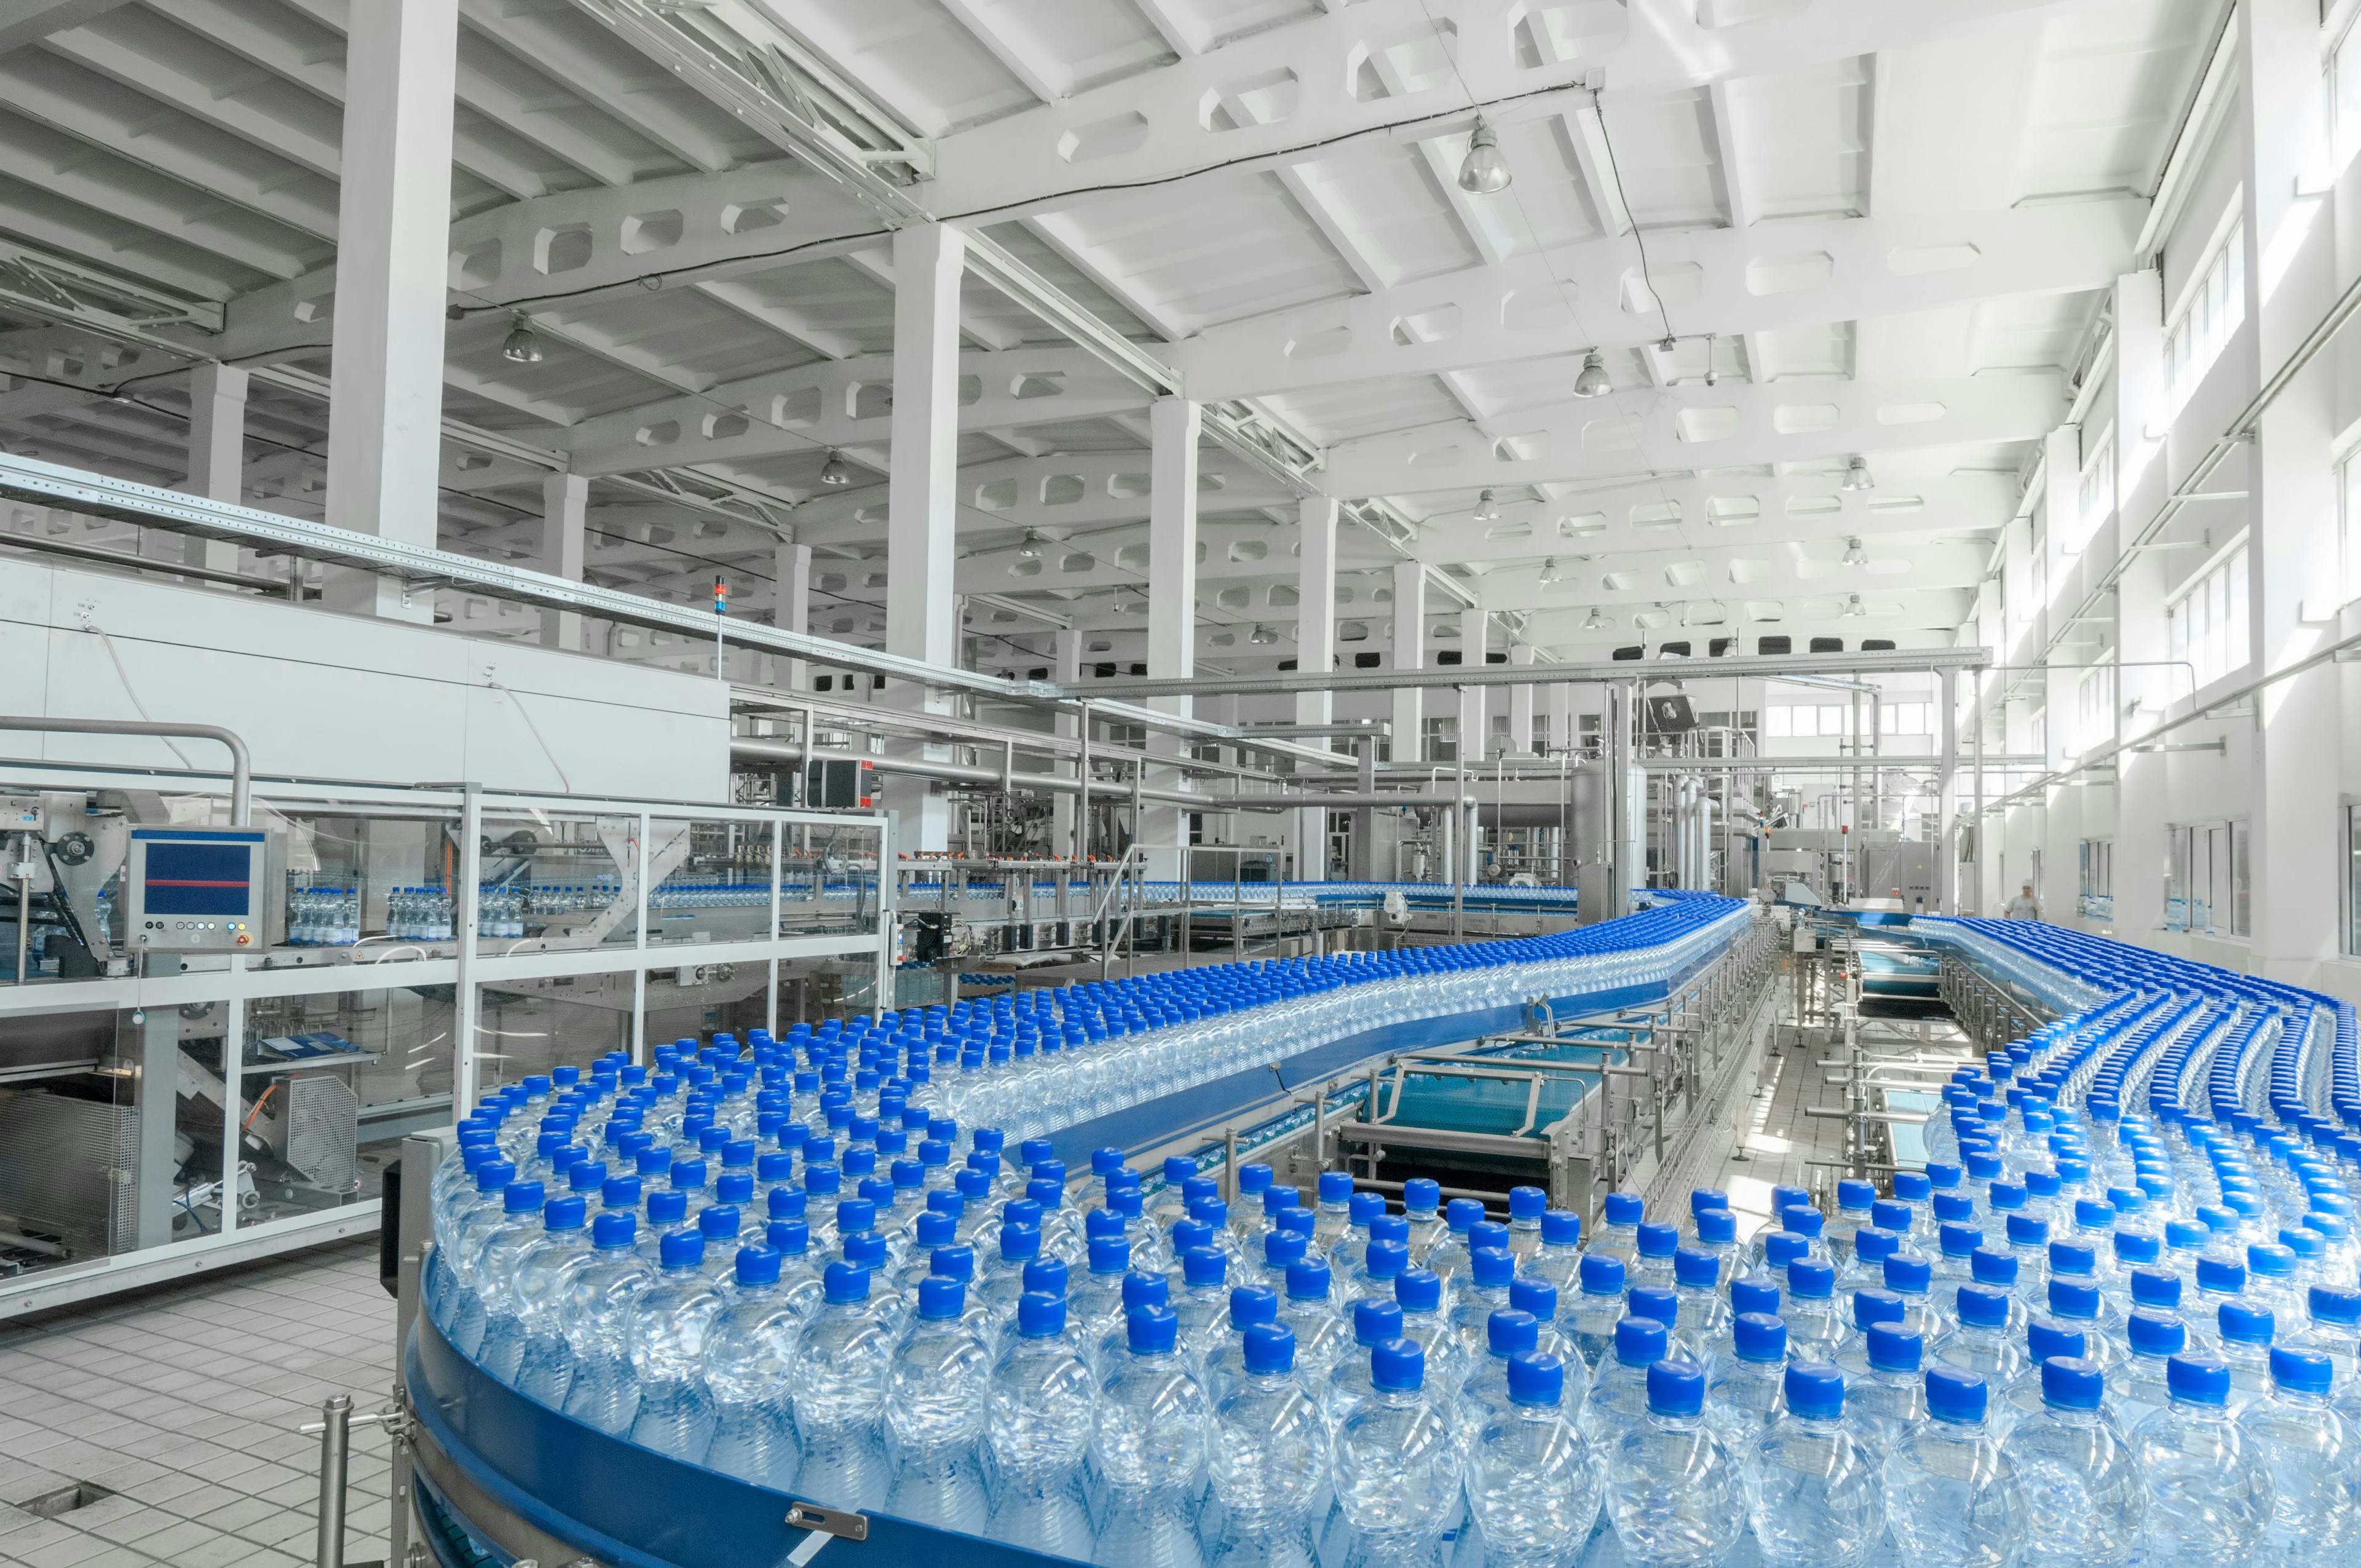 for the production of plastic bottles and bottles on a conveyor belt factory | Image Credit: © warloka79 - stock.adobe.com